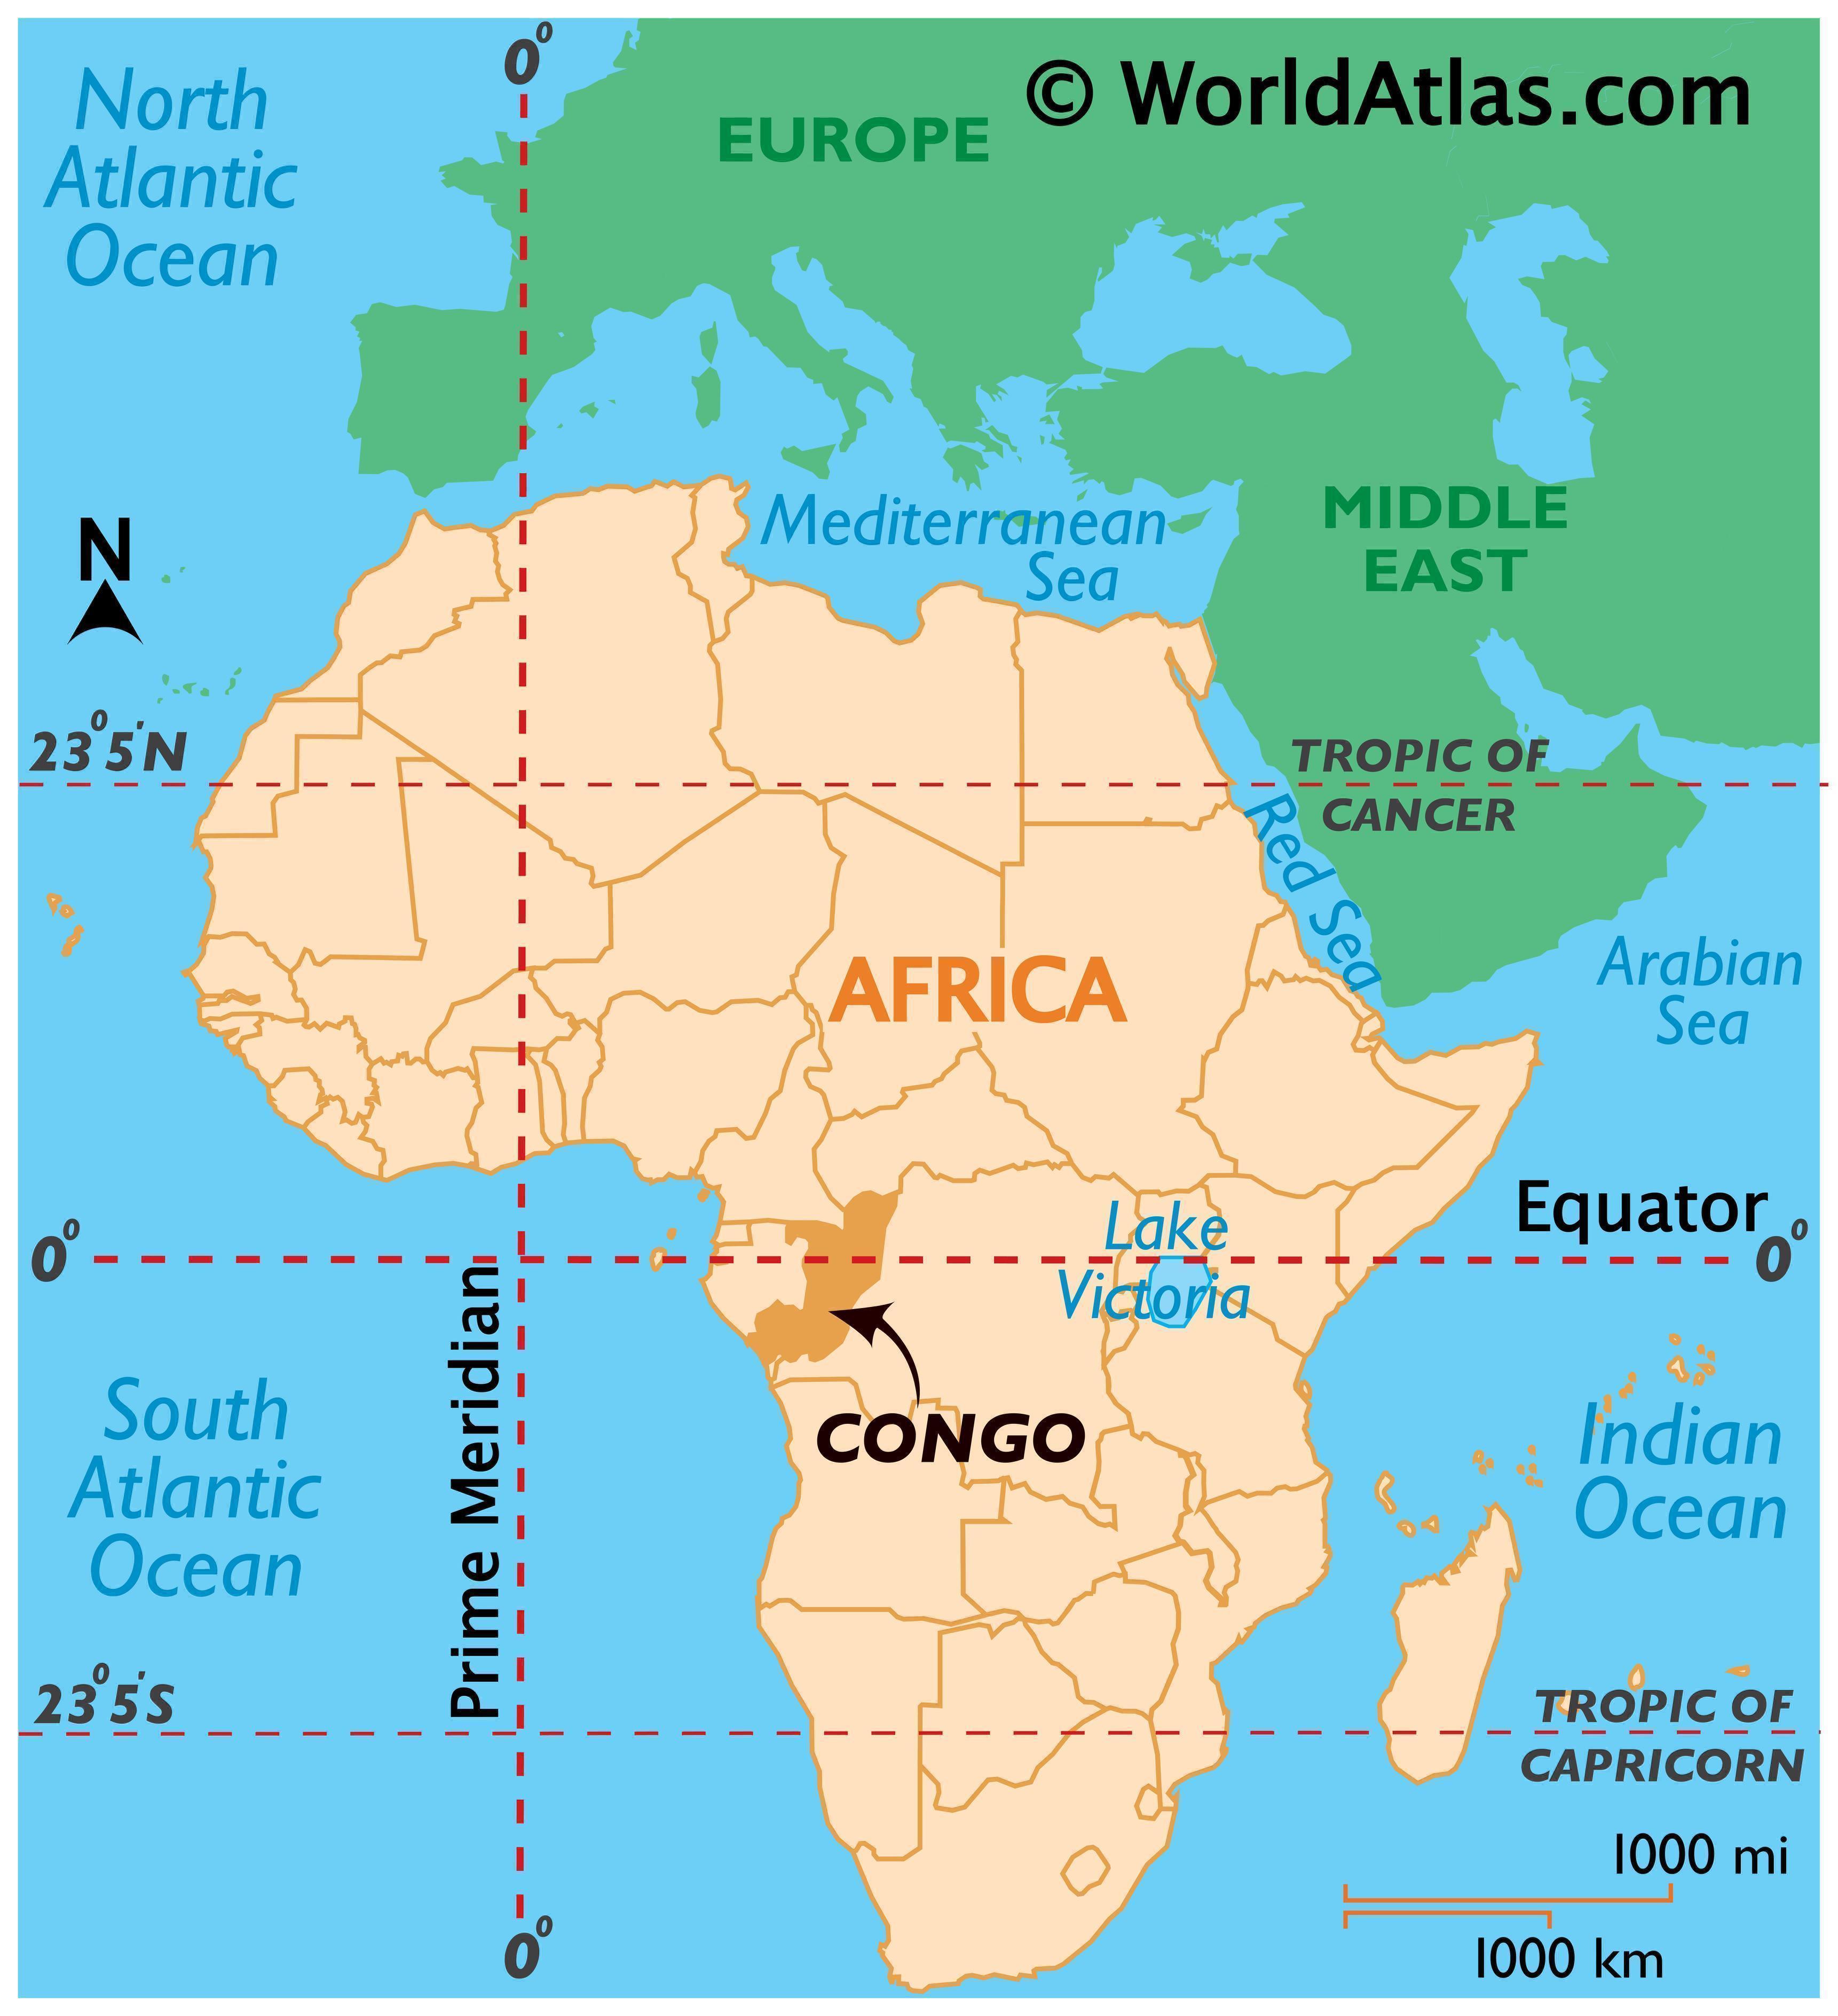 Congo Facts on Largest Cities, Populations, Symbols ...